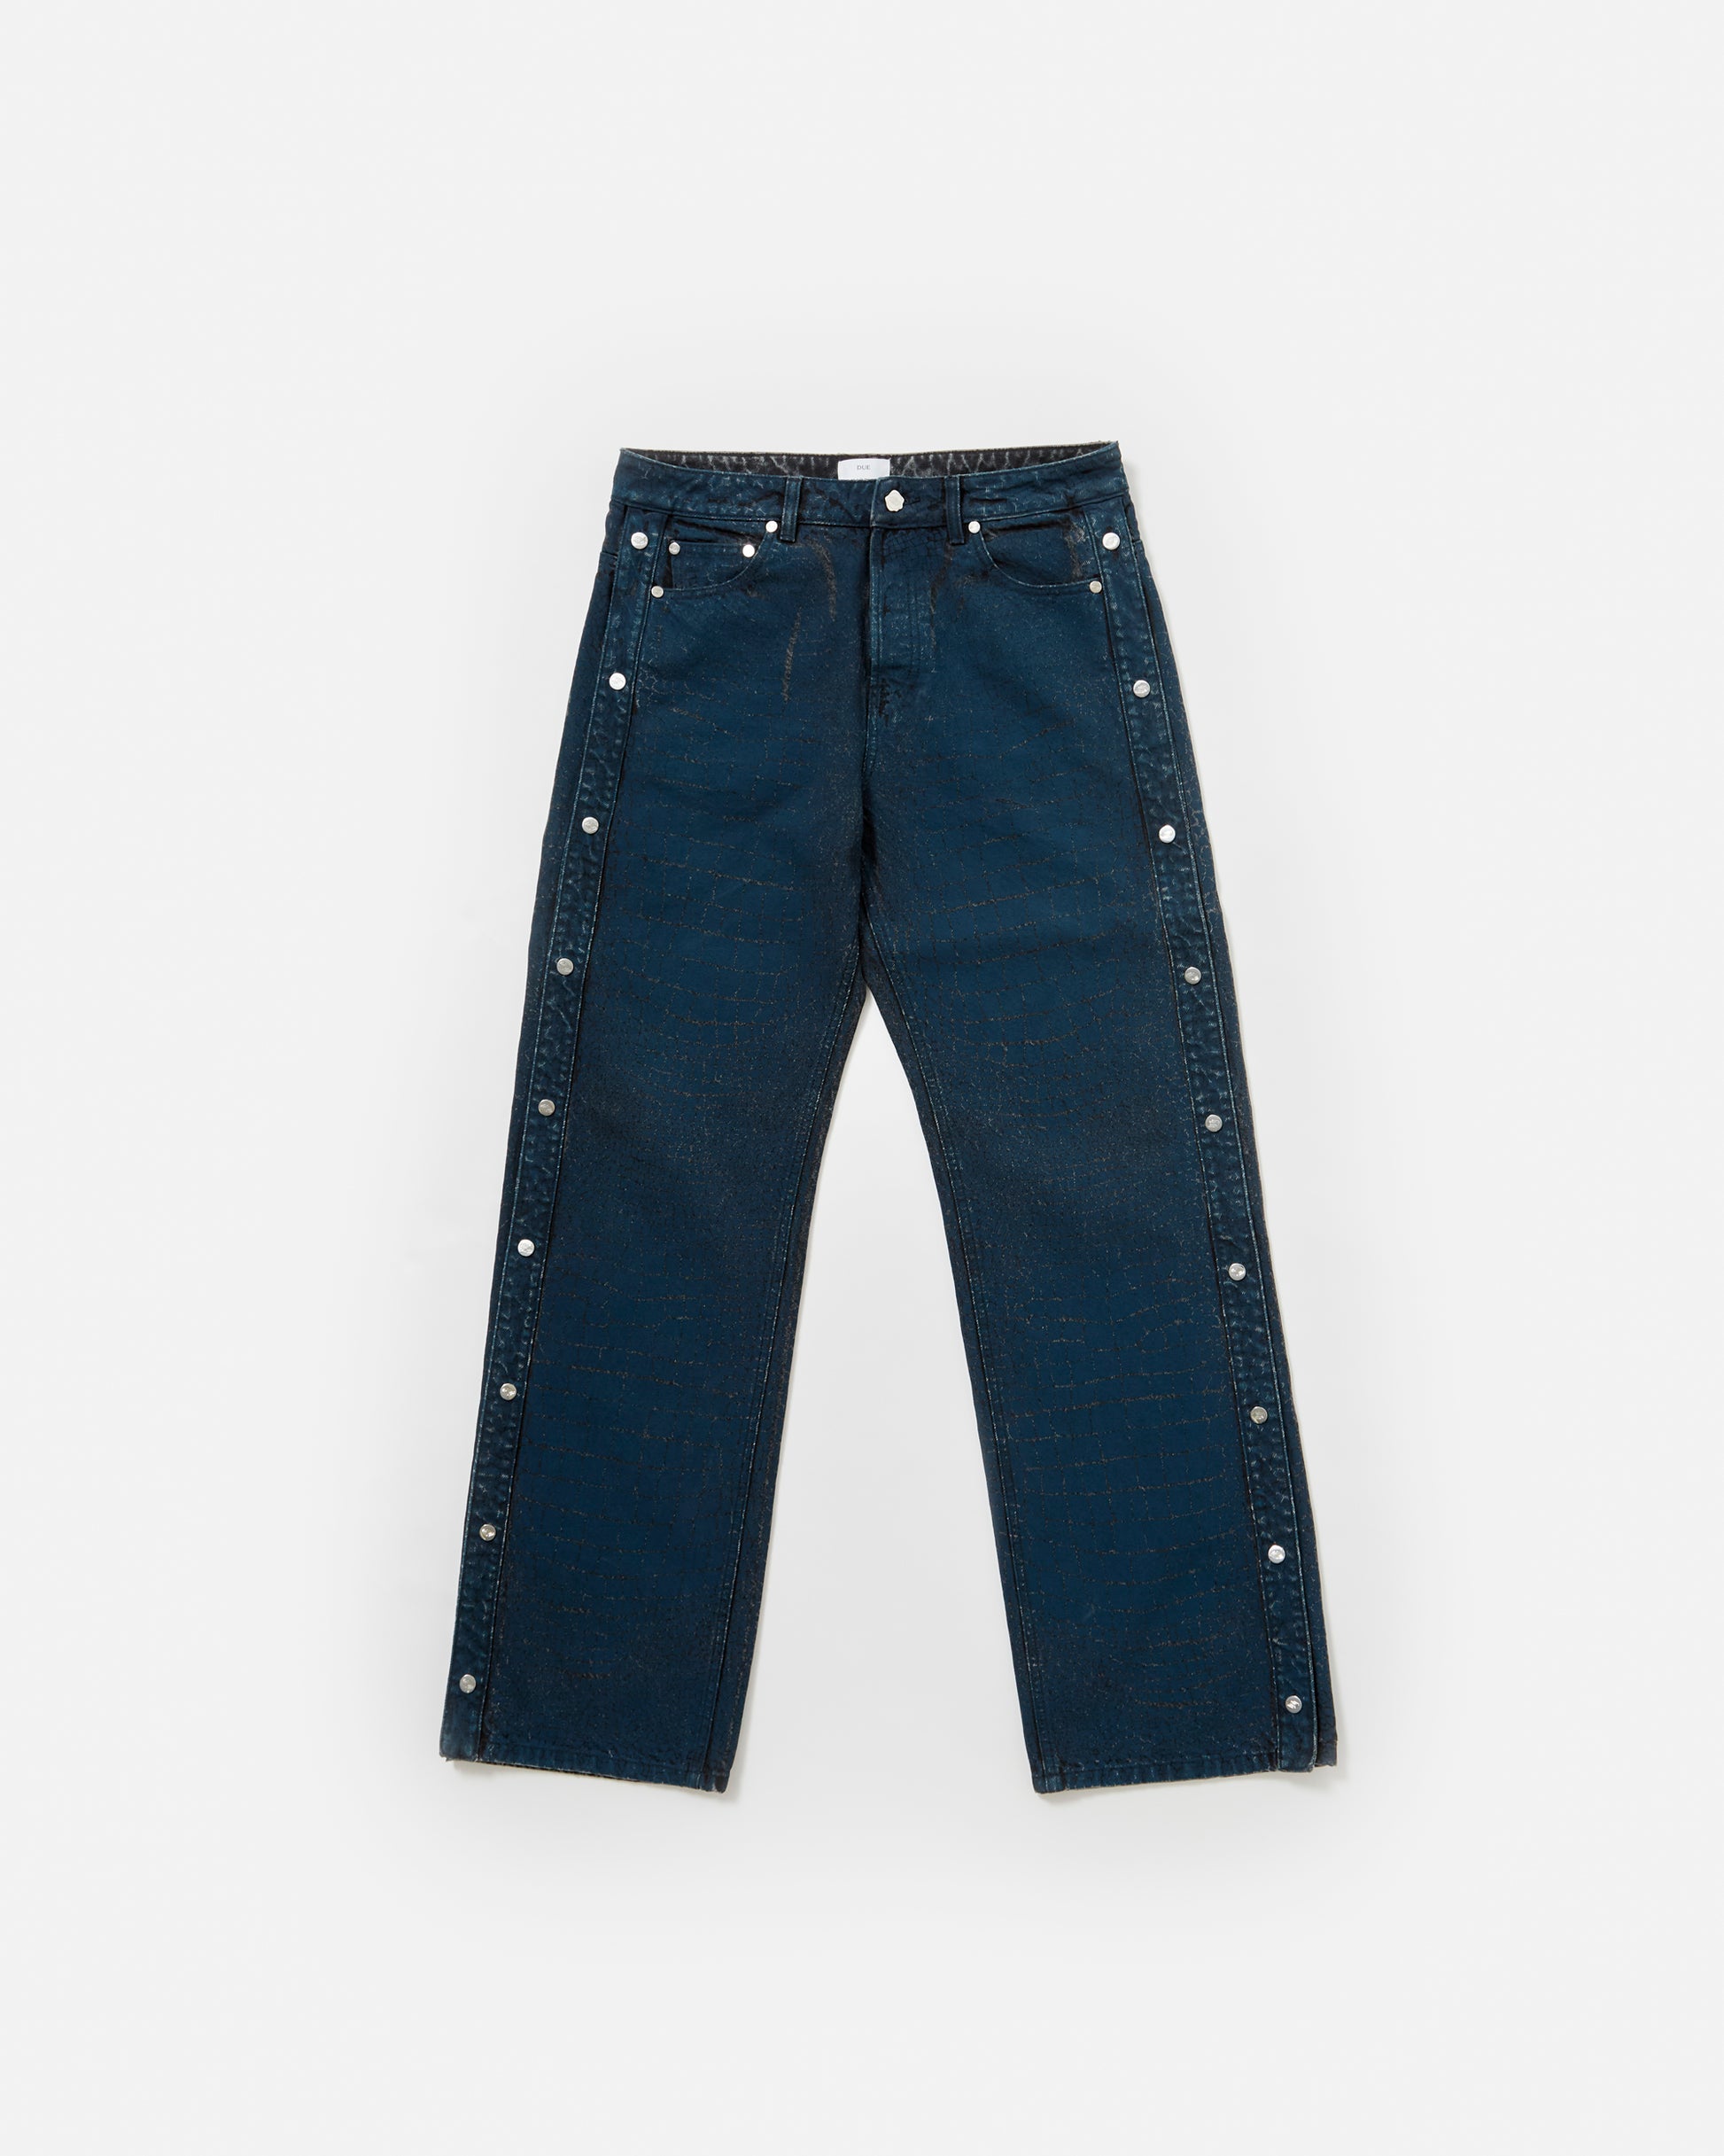 CROC PRINT JEAN WITH SIDE SNAPS - DISPATCH DATE BEGINNING JANUARY - Due Diligence Apparel